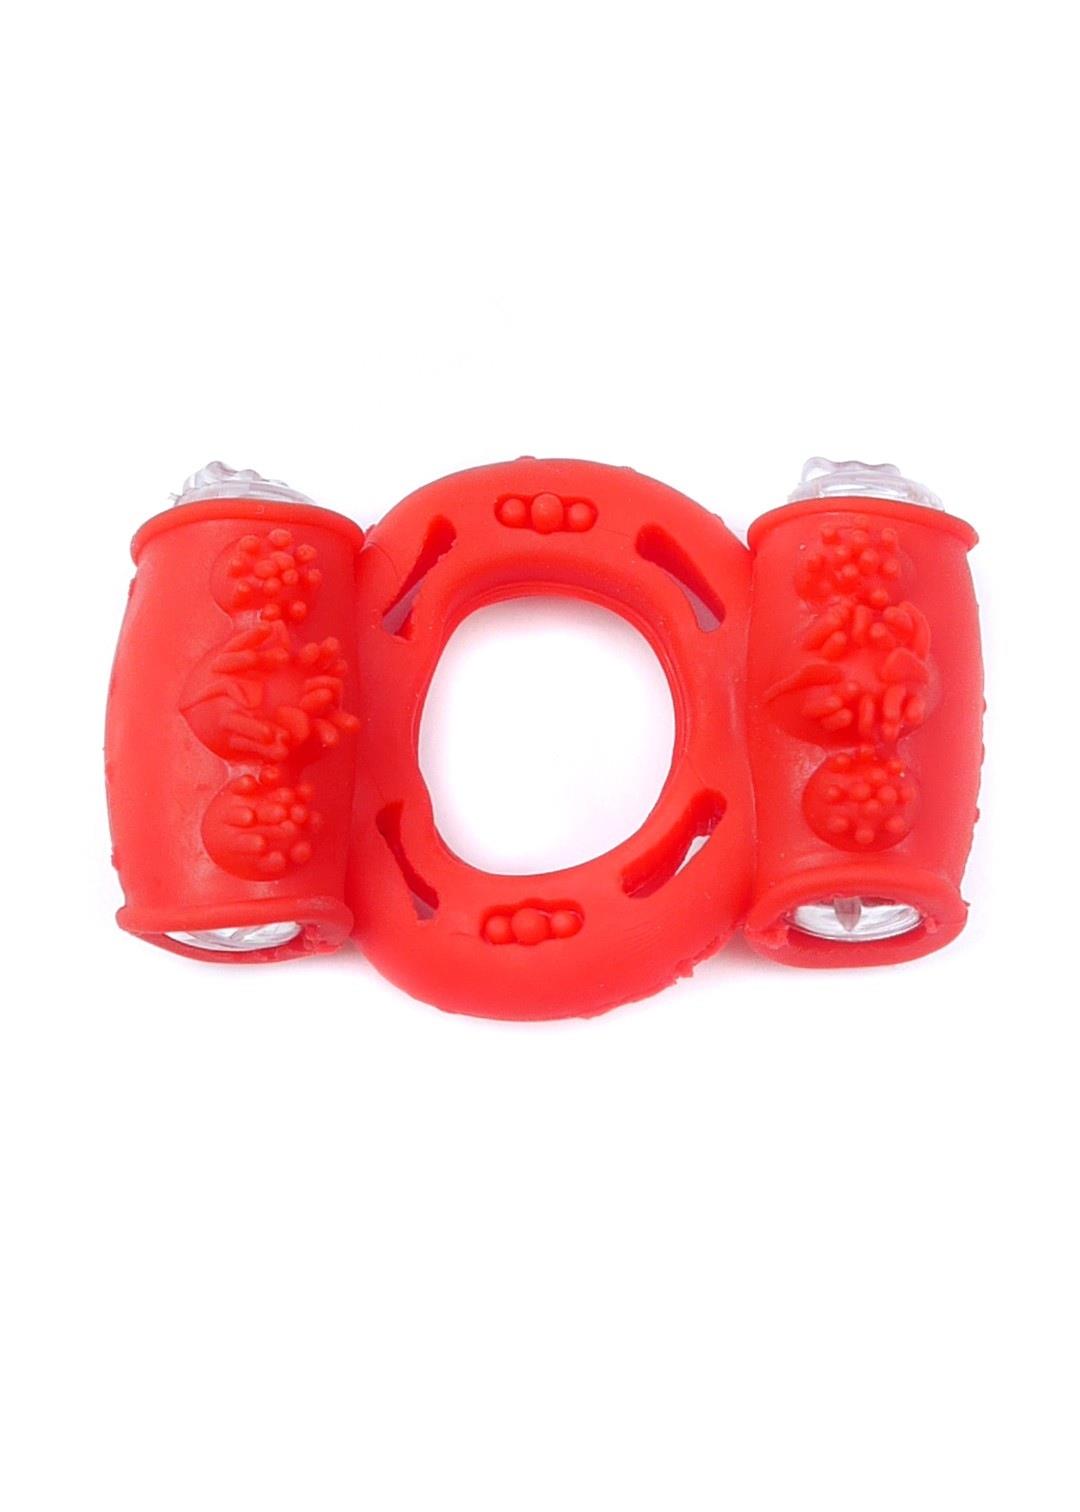 Bossoftoys - 67-00036 - Vibrating Cockring  - double Motors - Red - batteries included - packed in plastic bag